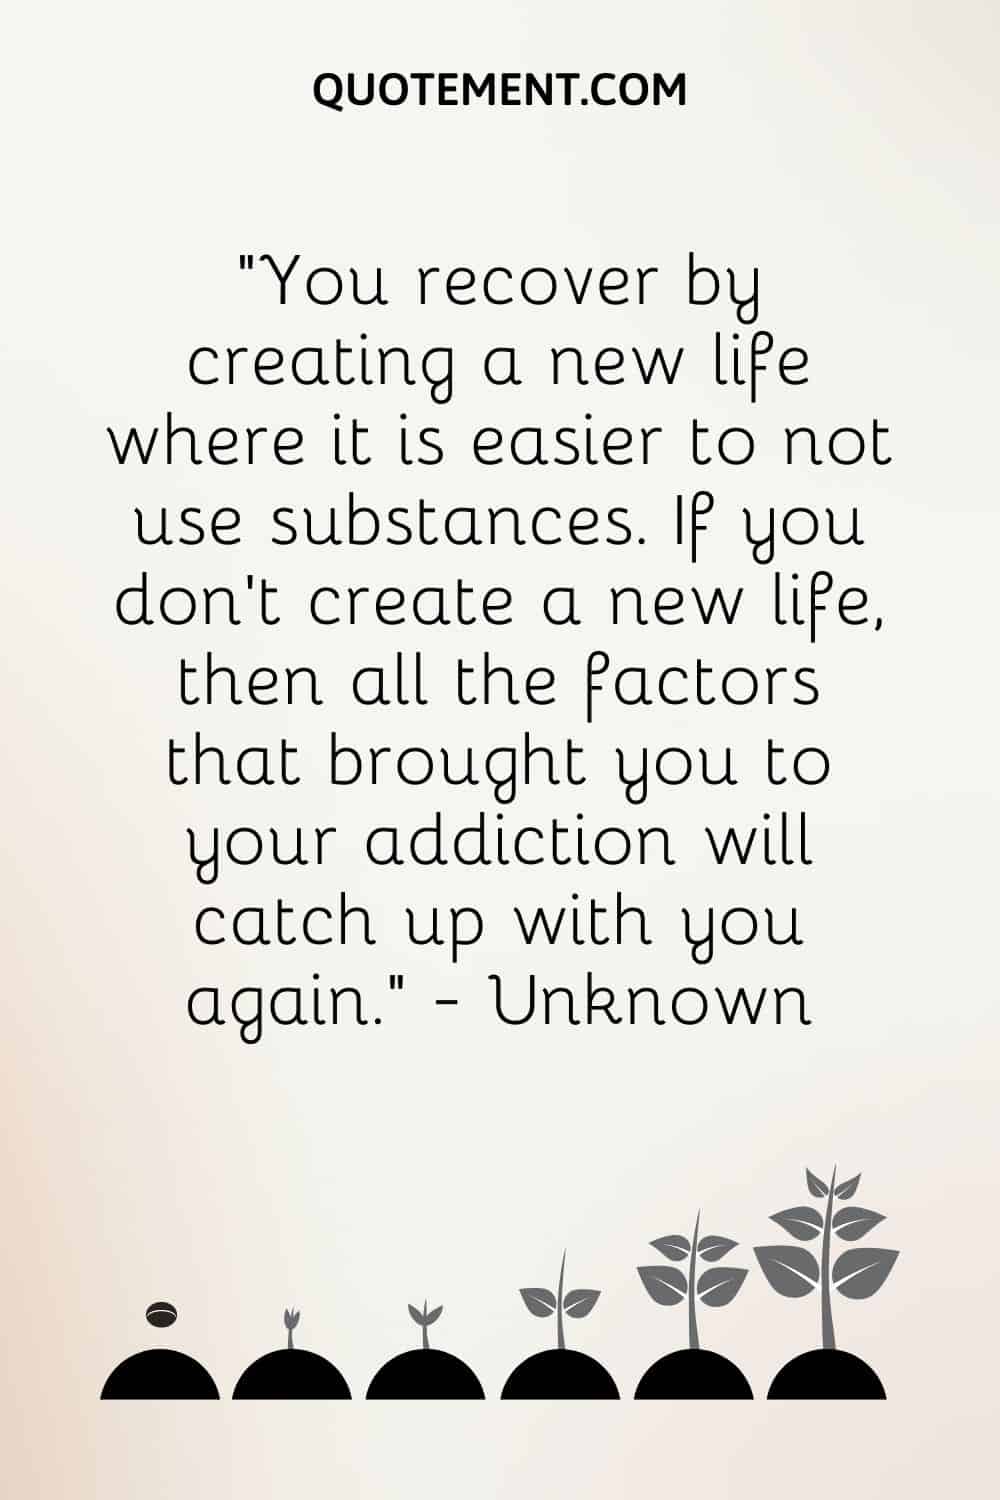 You recover by creating a new life where it is easier to not use substances